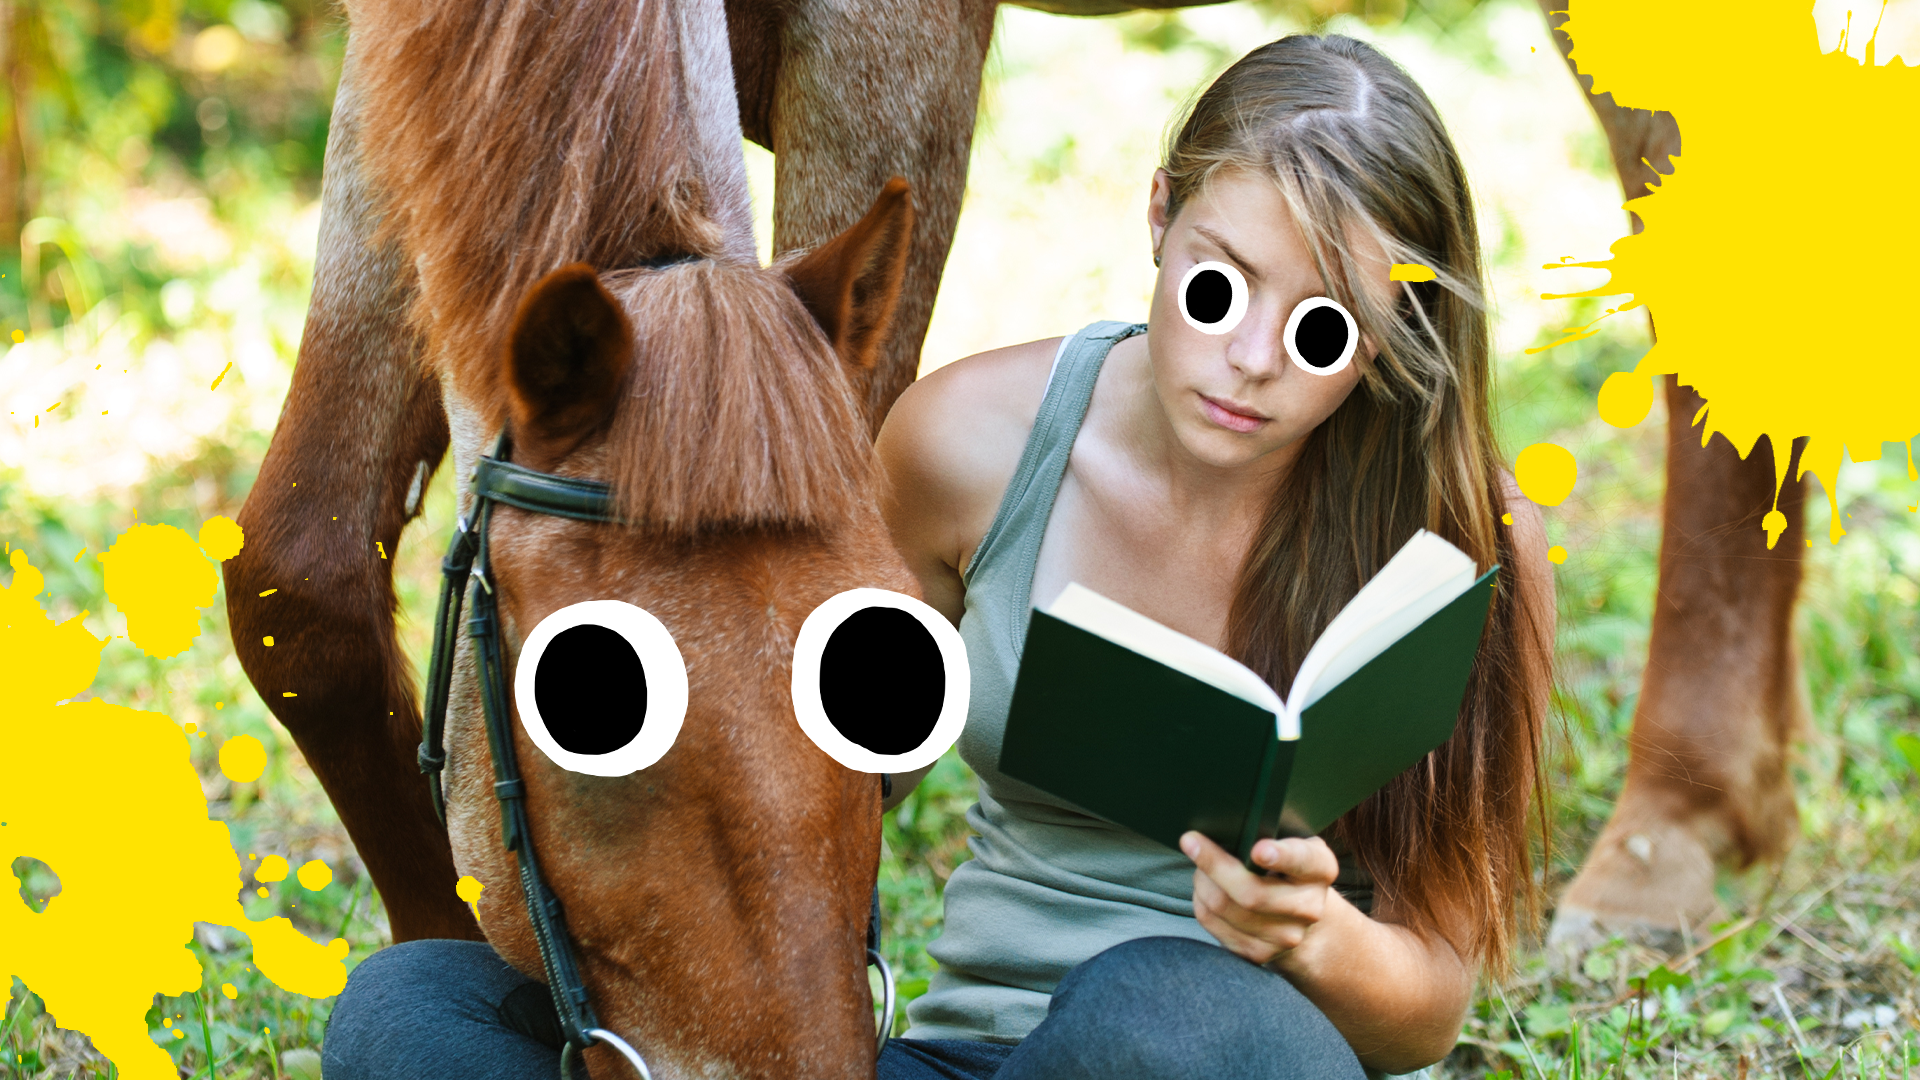 Woman reading next to horse with splats